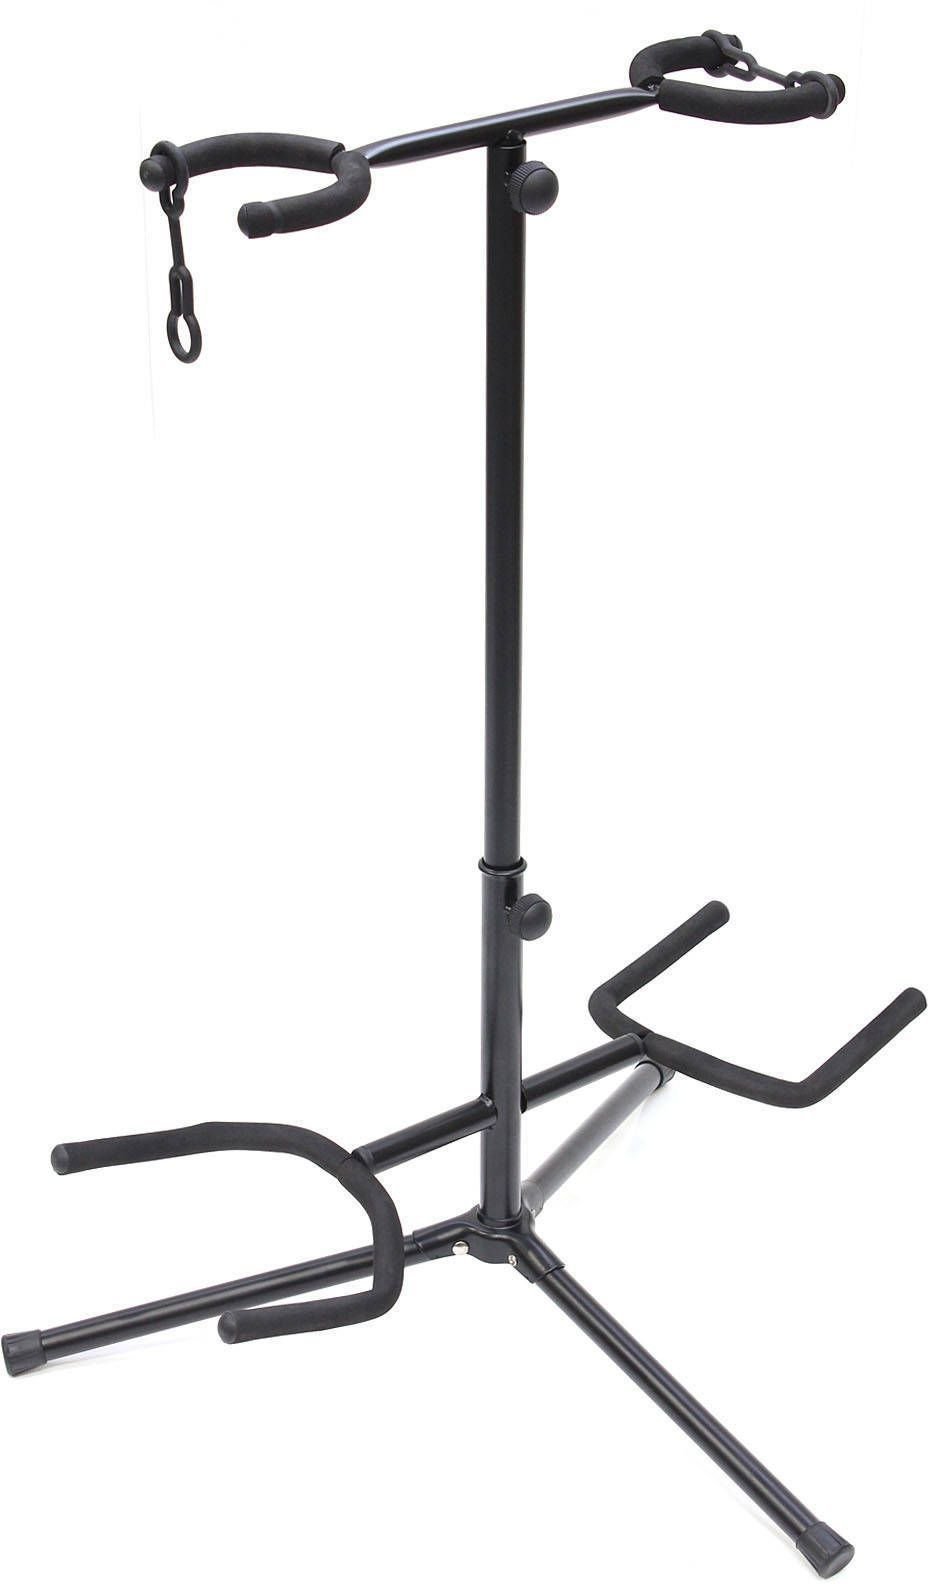 Guitar Stand Soundking DG 007 Guitar Stand